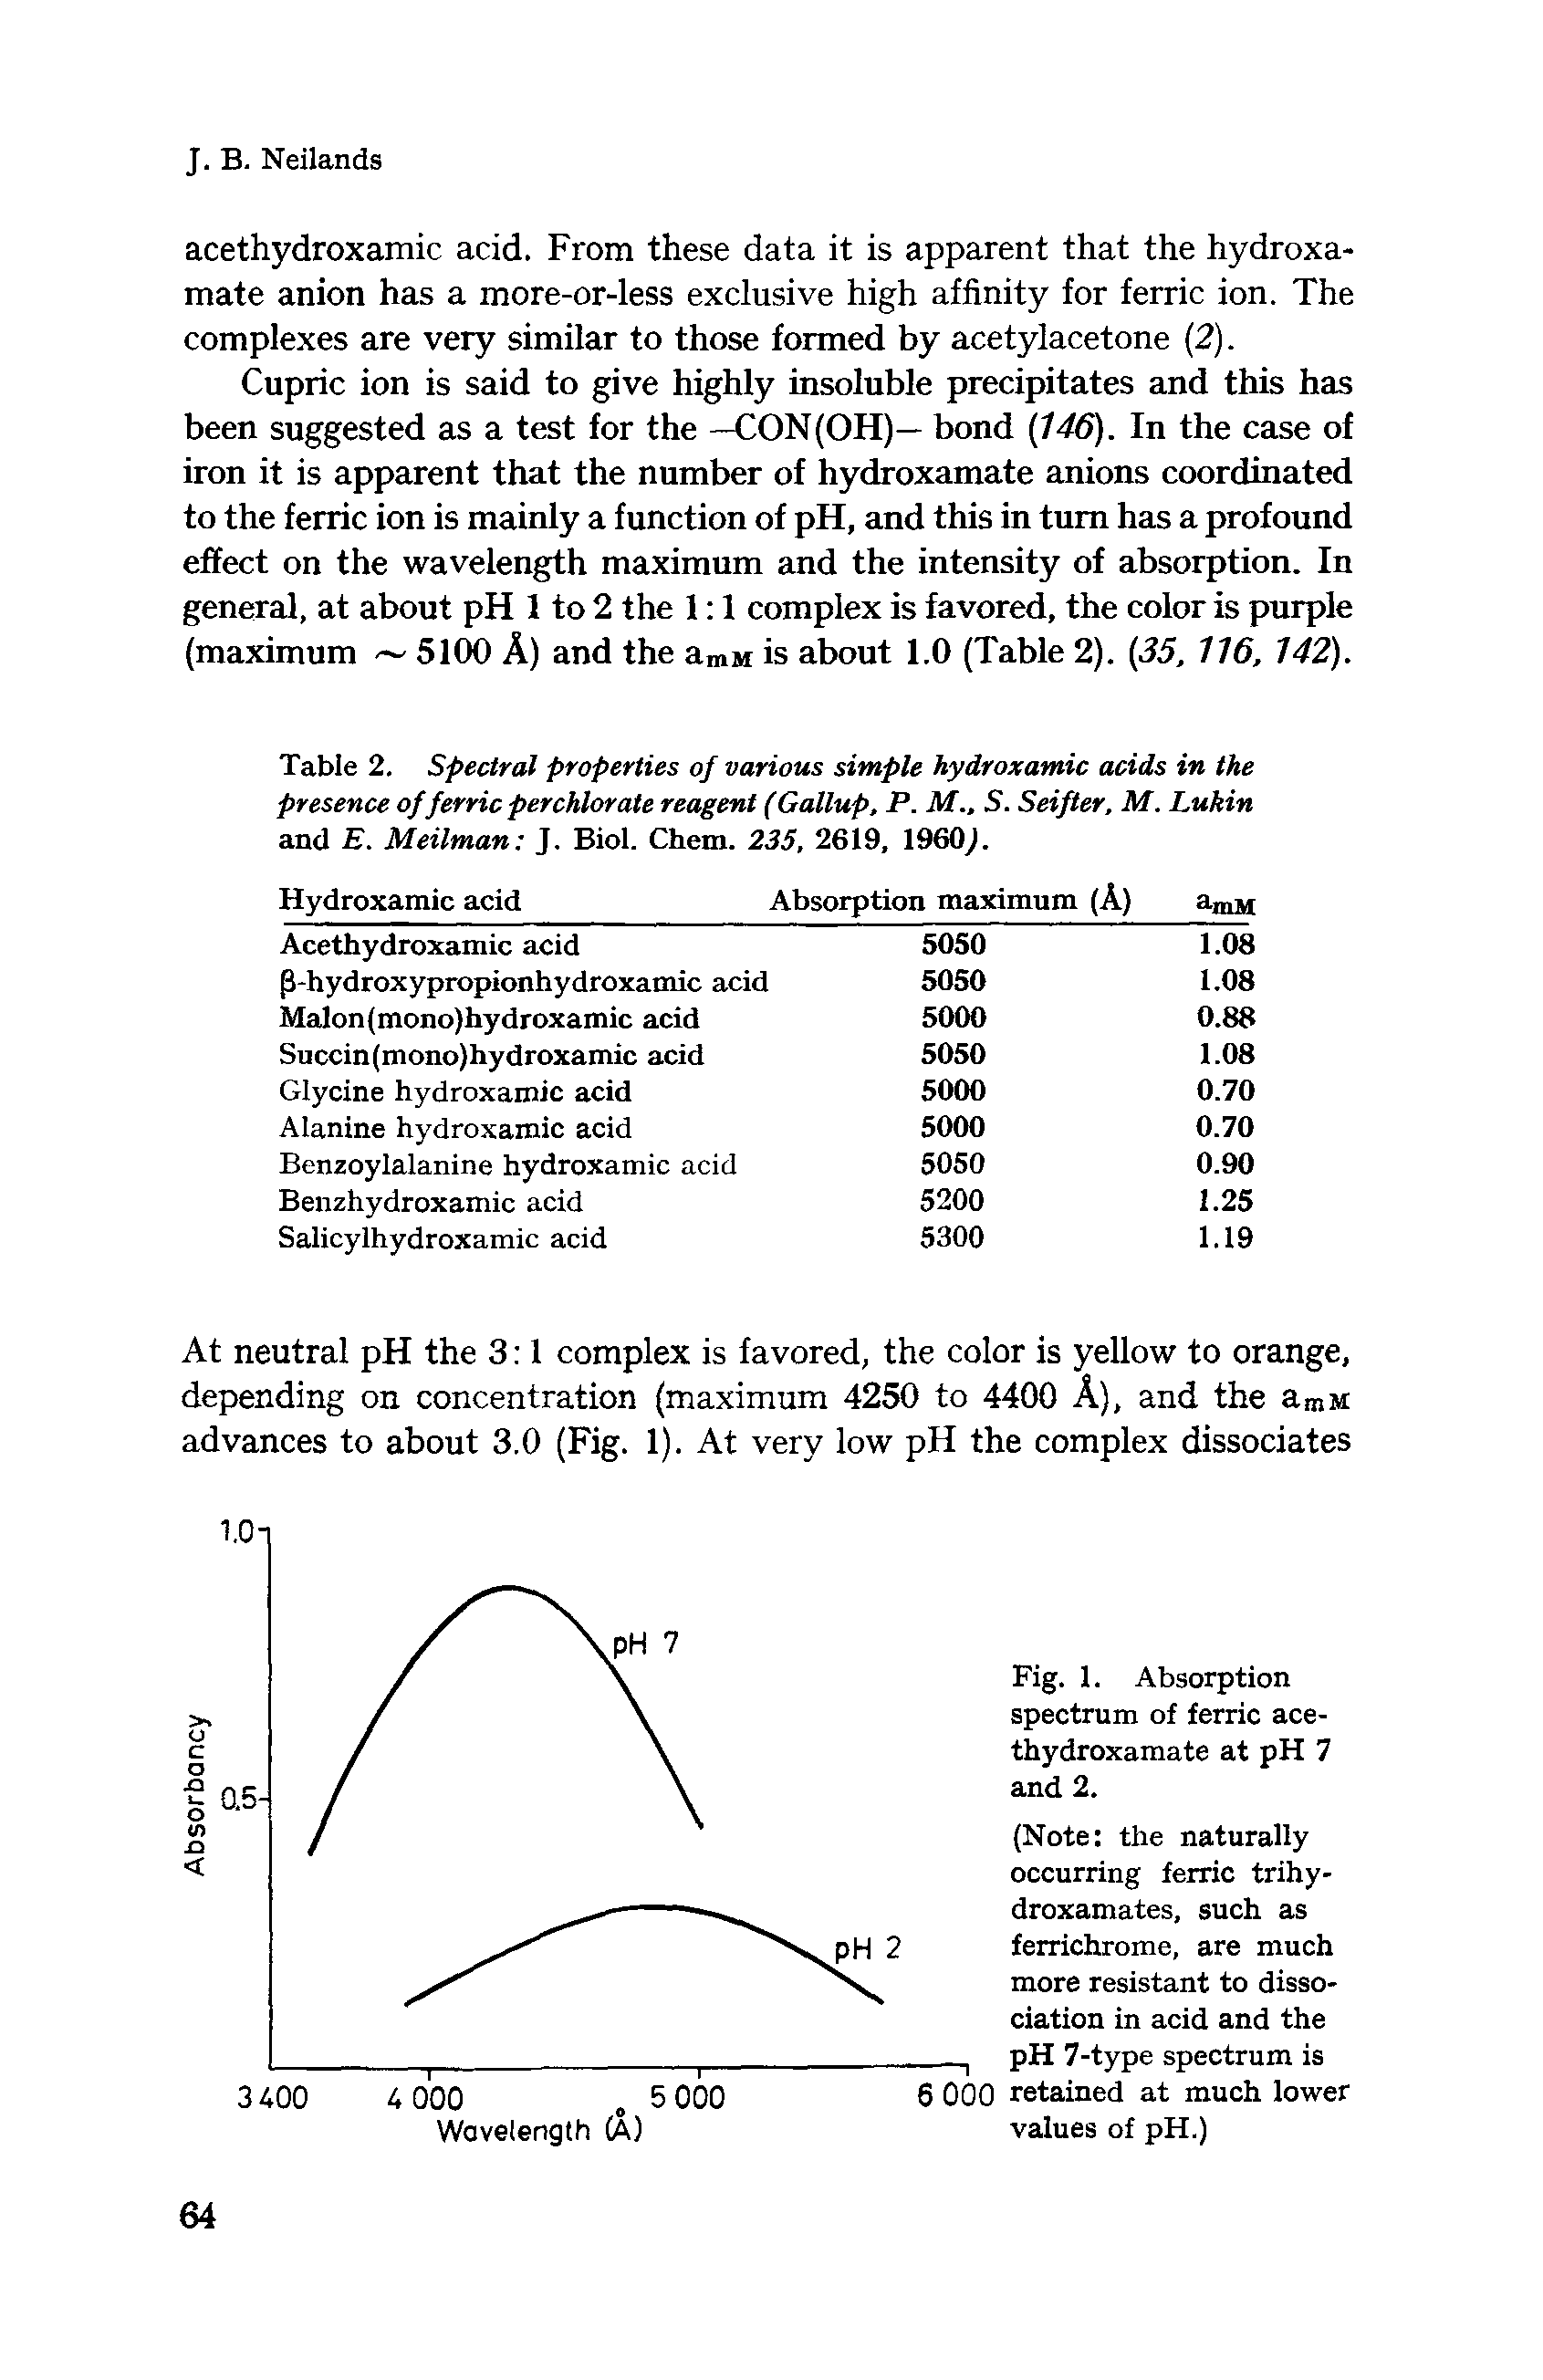 Table 2. Spectral properties of various simple hydroxamic acids in the presence of ferric perchlorate reagent (Gallup, P. M S. Seifter, M. Lukin and E. Meilman J. Biol. Chem. 235, 2619, I960).